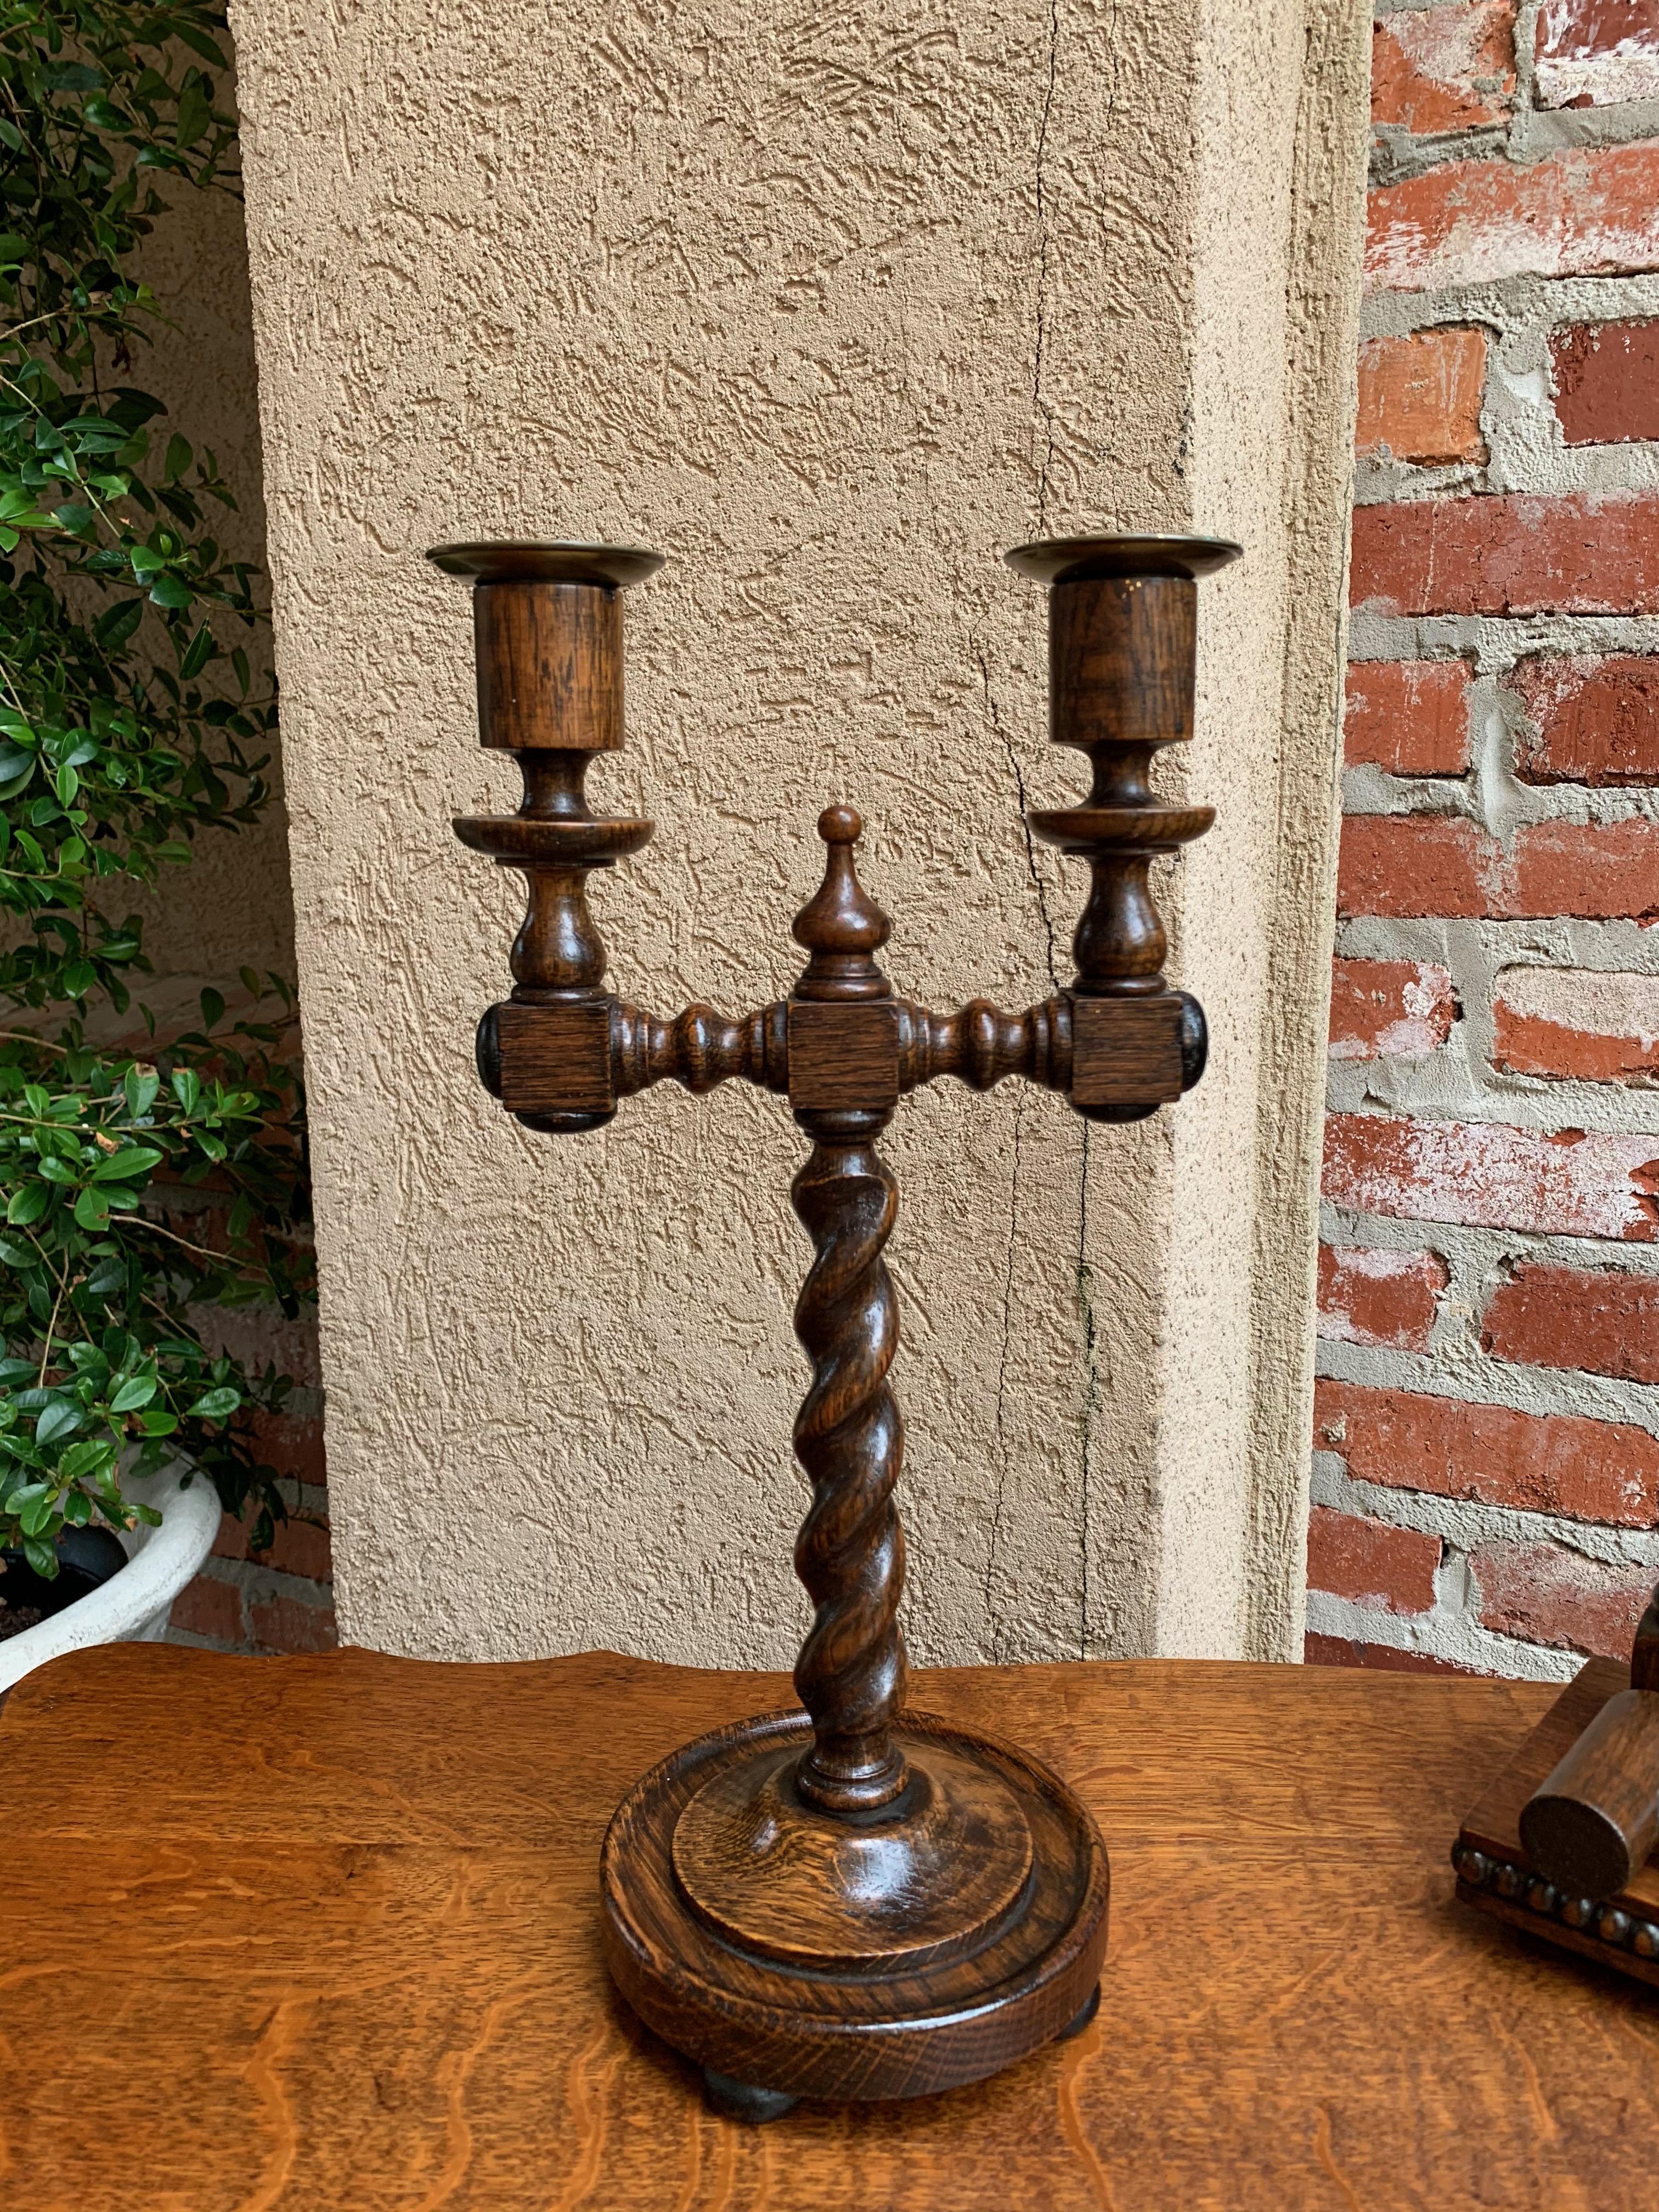 Direct from England, a lovely little piece of British charm, this vintage oak barley twist “candelabra” candleholder is perfect treasure for any barley twist aficionado!~
~Dual candleholders on one center barley twist post~
~English turned arms